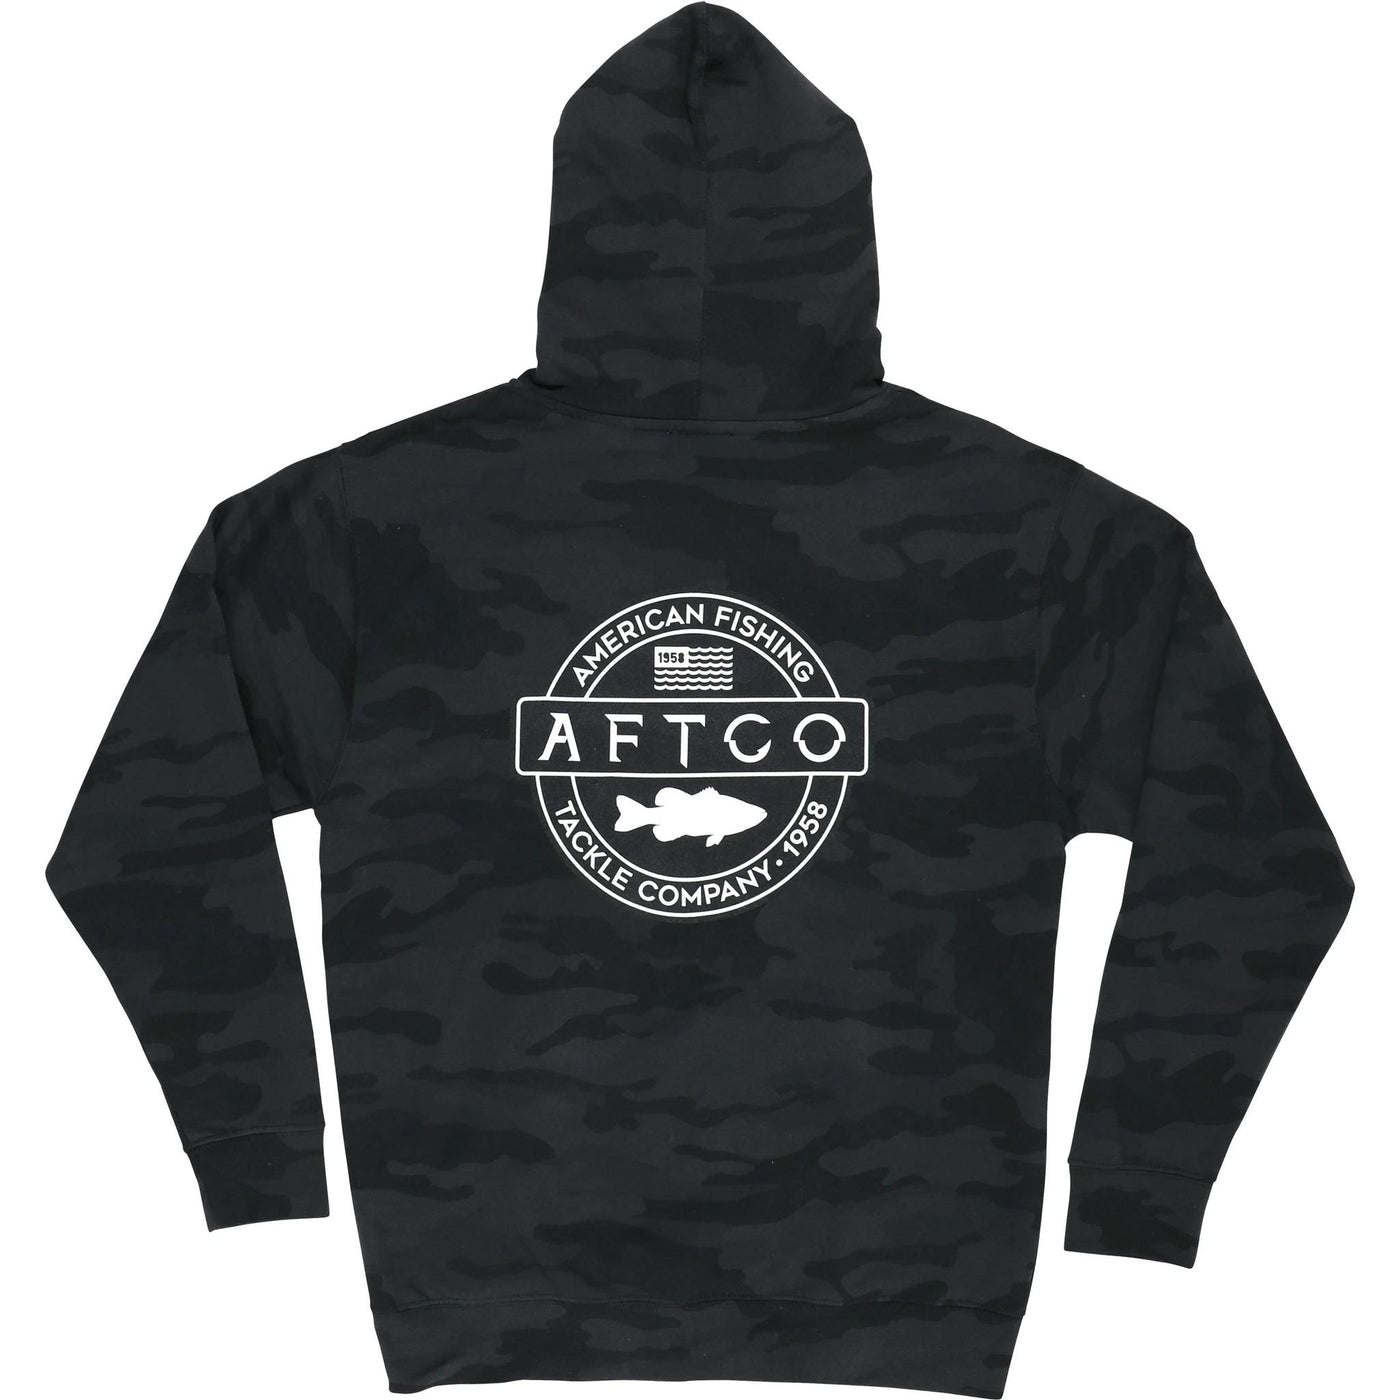 Aftco Bass Patch Pullover Hoodie-MENS CLOTHING-Kevin's Fine Outdoor Gear & Apparel